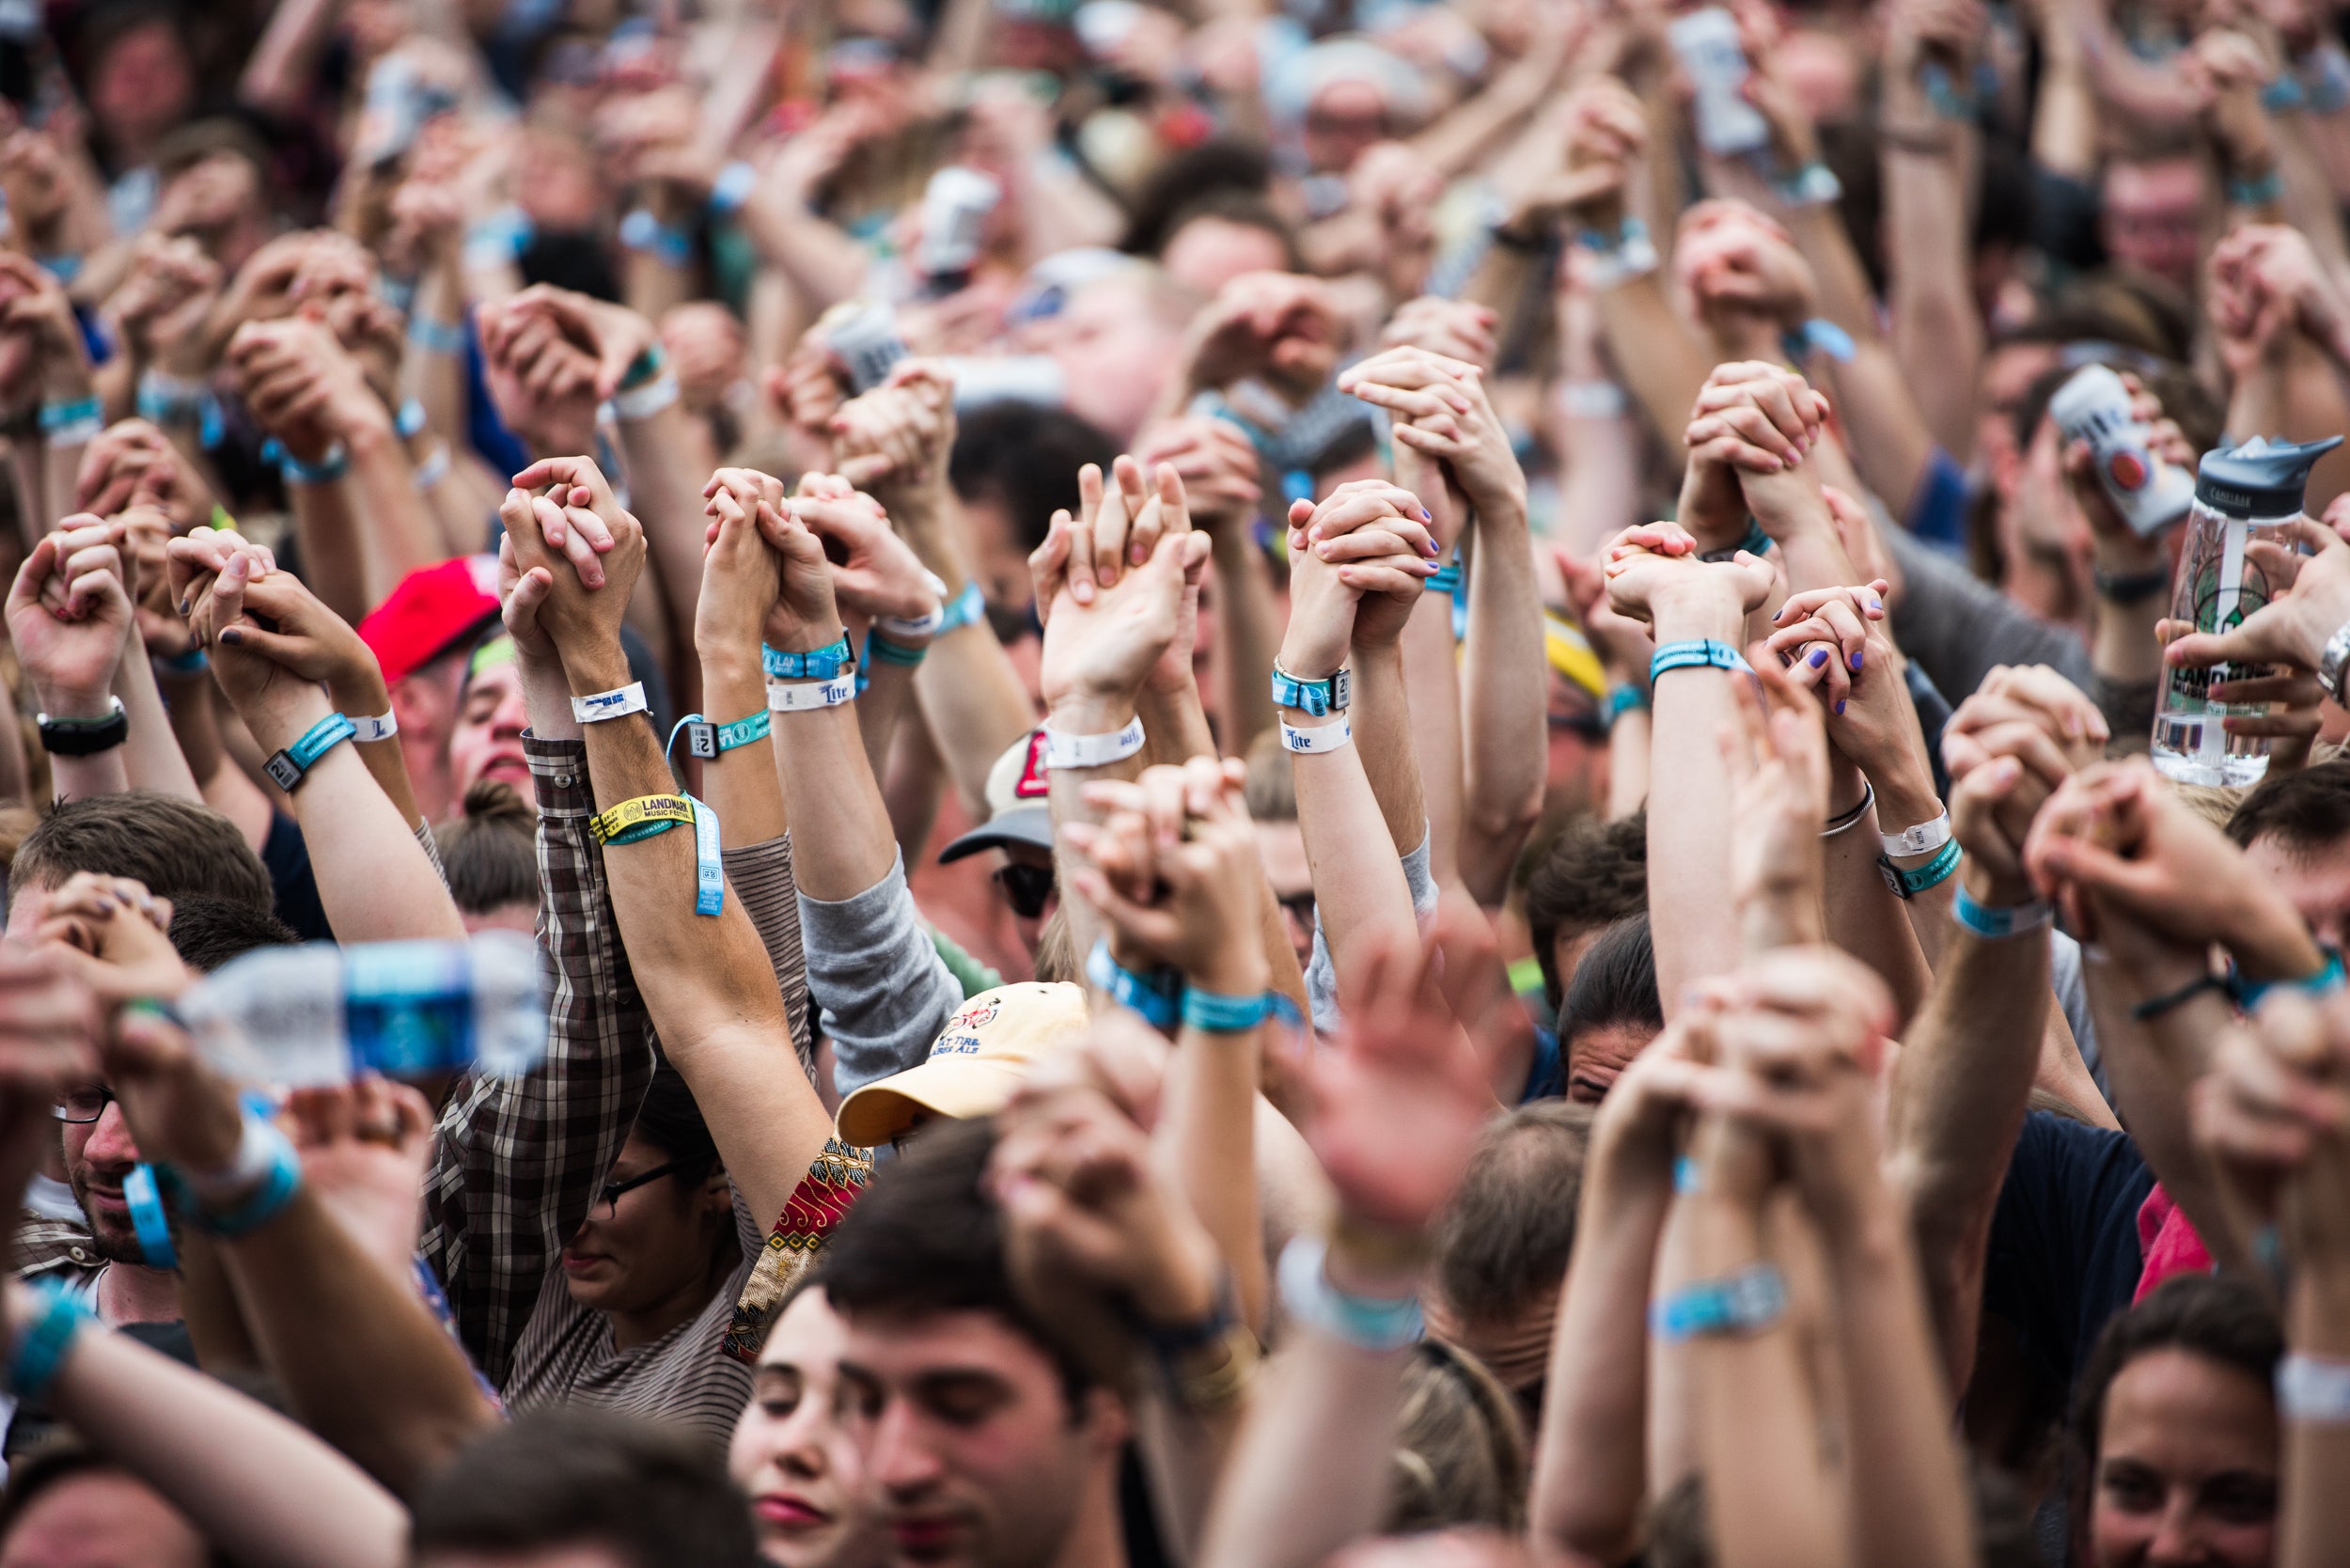 The crowd holds hands at Dan Deacon's set. via Charles Reagan Hackleman